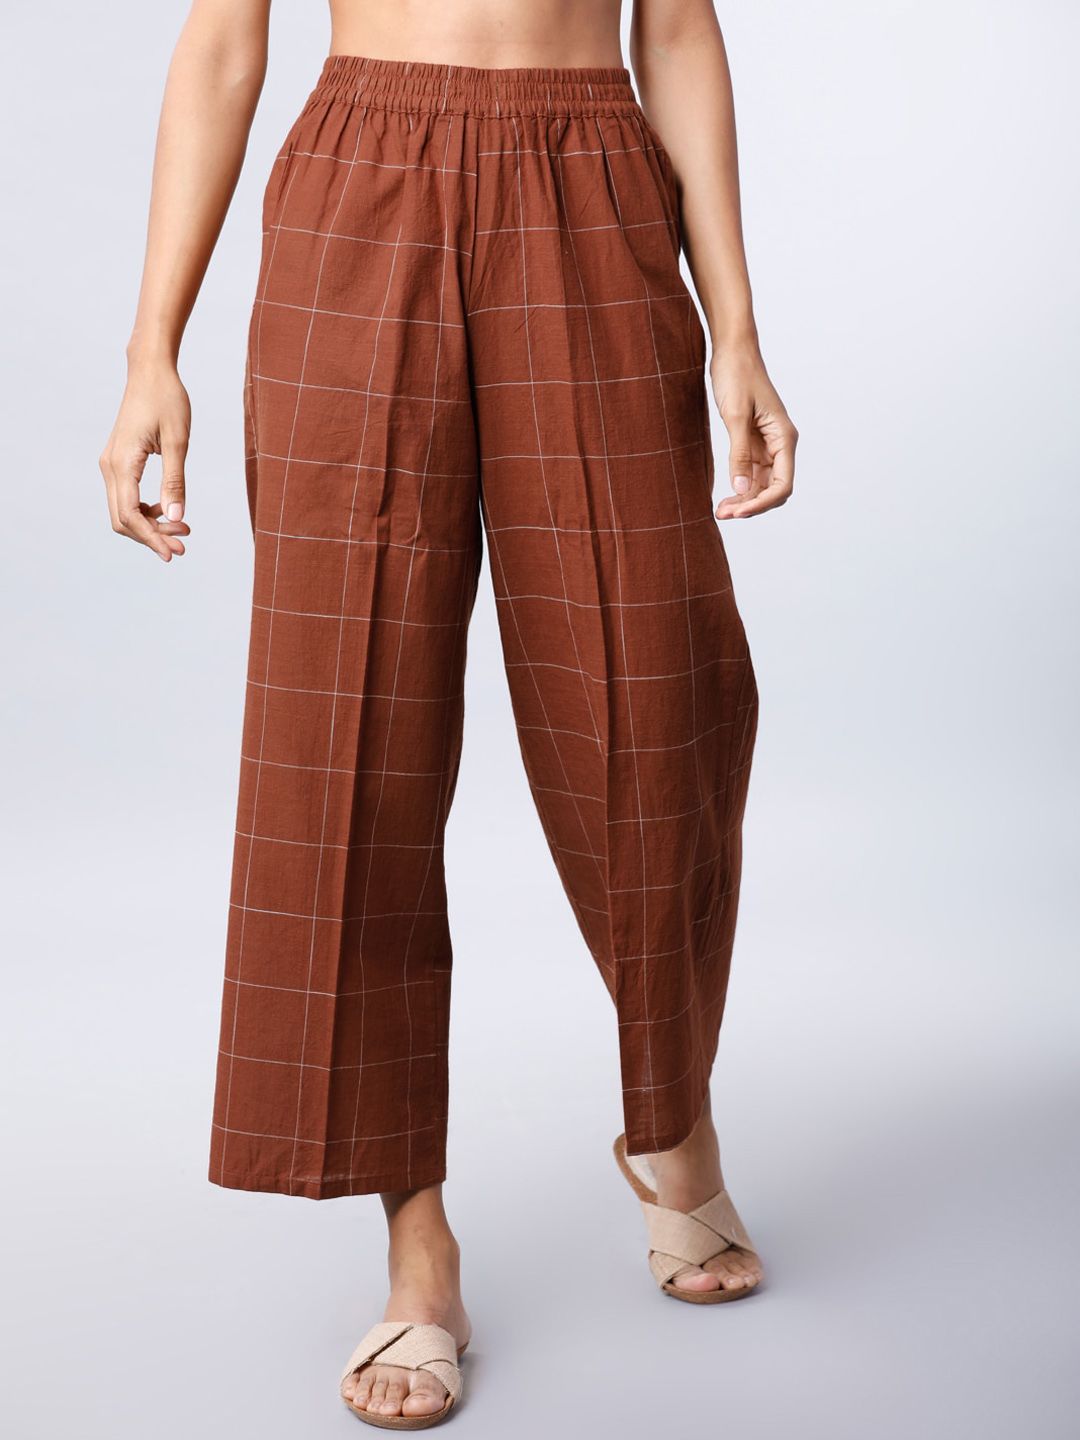 Vishudh Women Brown & Cream-Coloured Checked Straight Palazzos Price in India